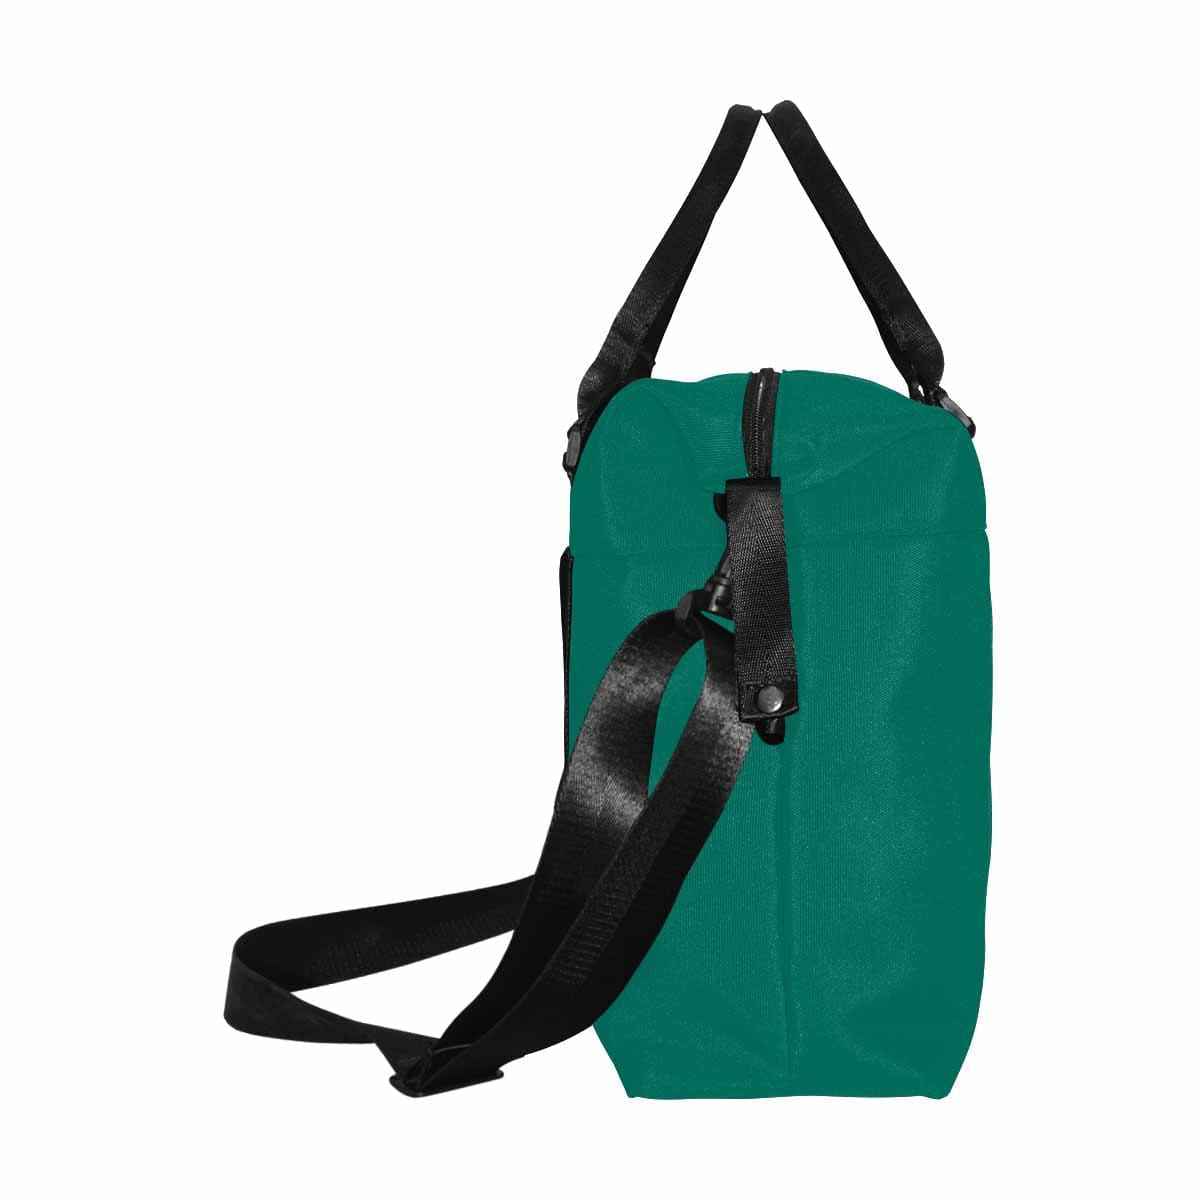 Travel Bag Teal Green Canvas Carry On - Bags | Travel Bags | Canvas Carry